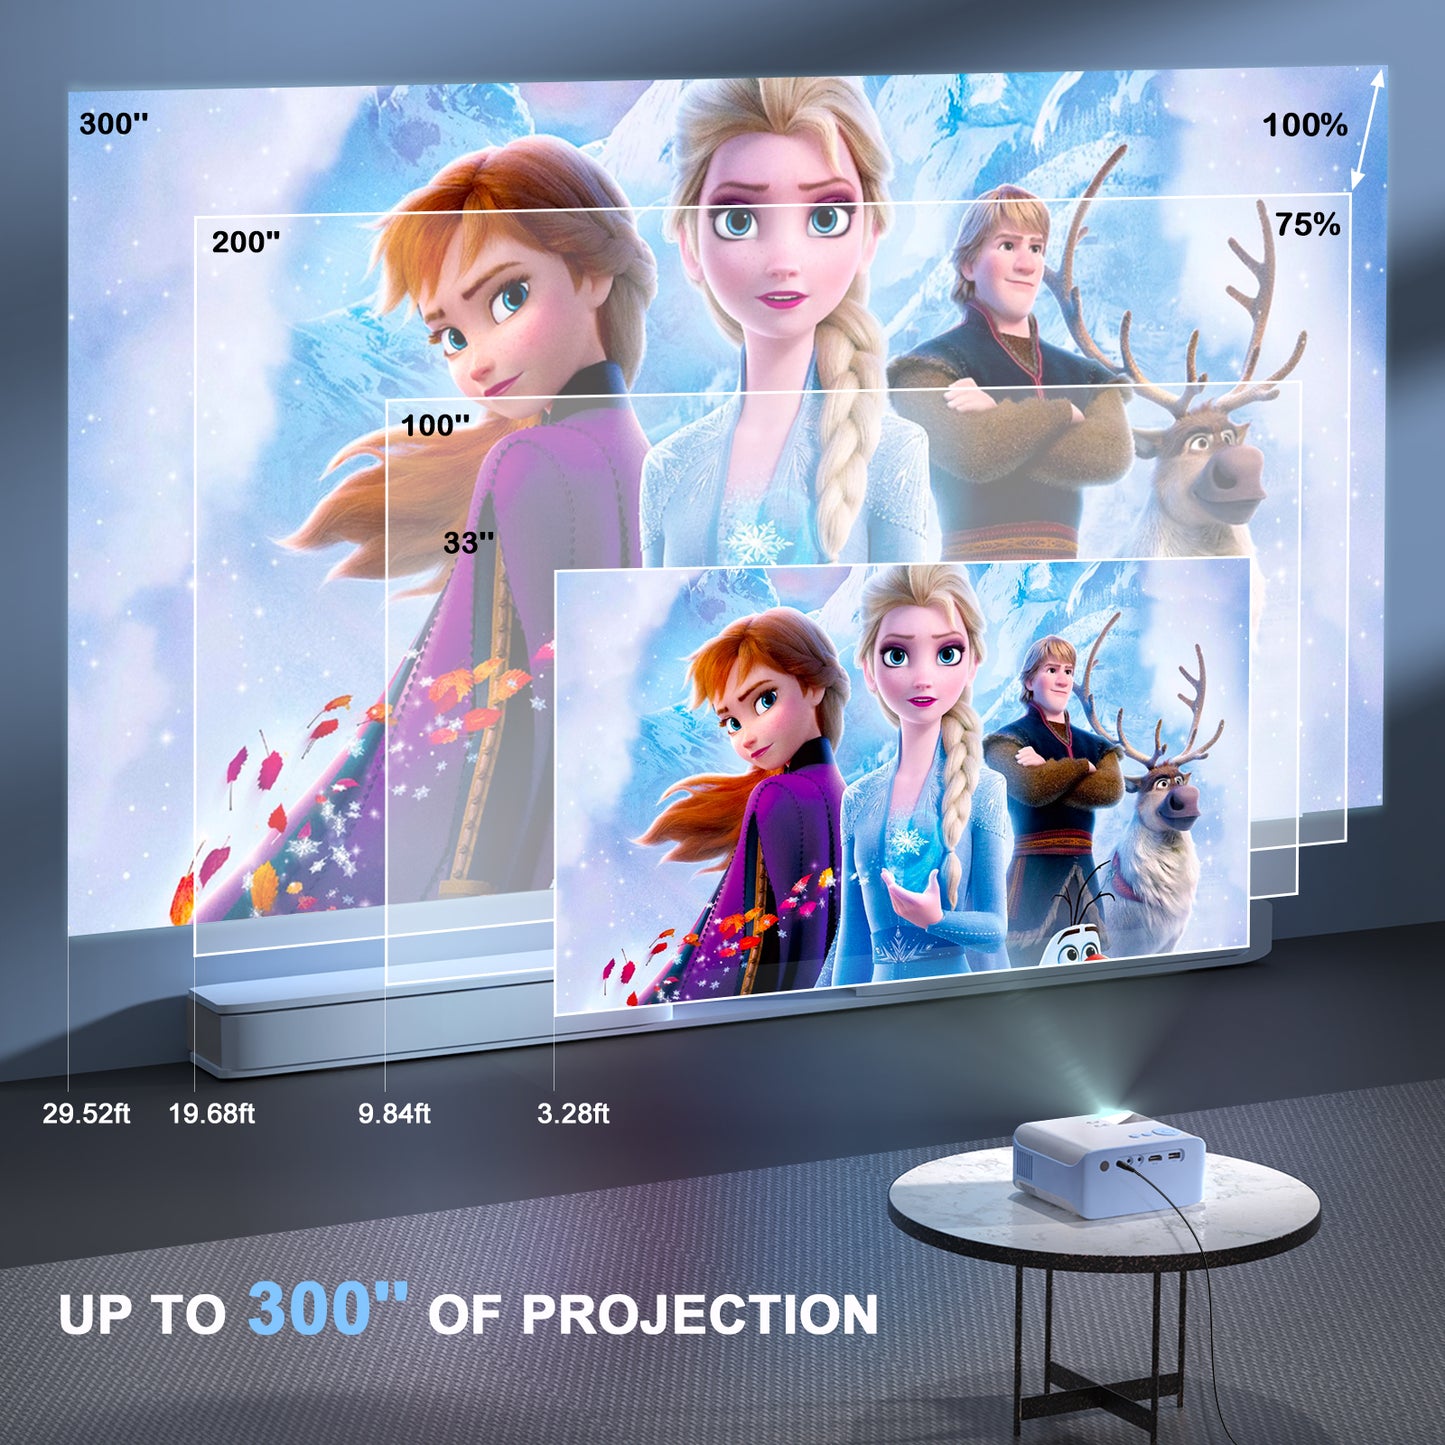 Mini Projector, Native 1080P Full HD 9000L SOPYOU P2 Movie Outdoor Projector 4K Supported with Tripod